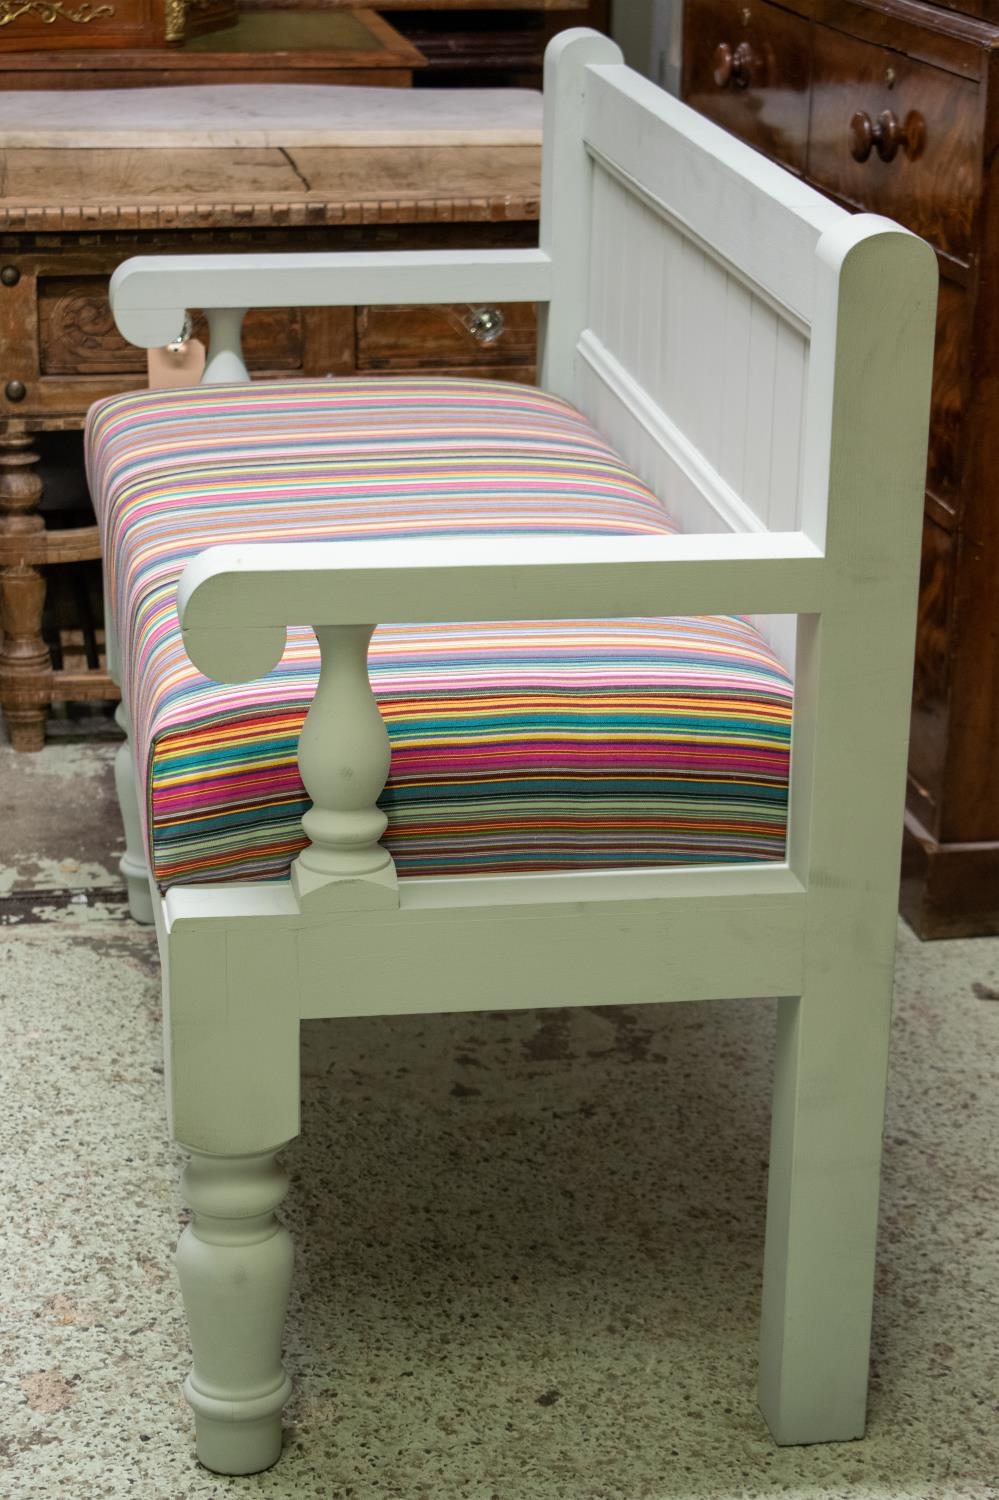 BENCH, 92cm H x 120cm W x 53cm D, painted with multi coloured striped padded seat. - Image 2 of 3